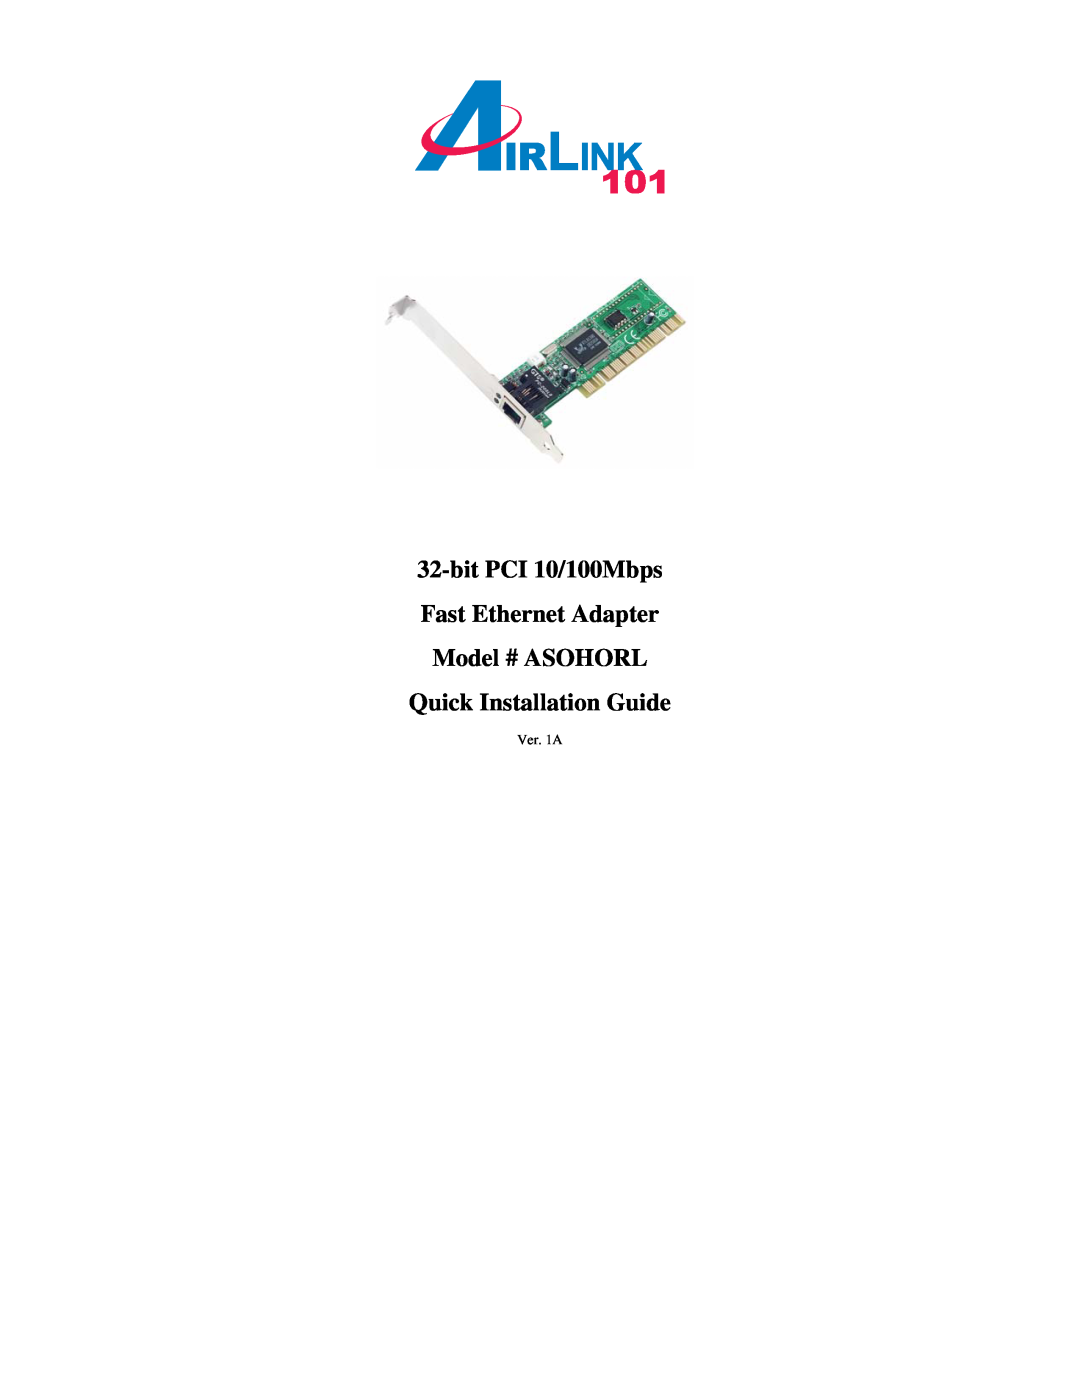 Airlink101 manual bit PCI 10/100Mbps Fast Ethernet Adapter Model # ASOHORL, Quick Installation Guide, Ver. 1A 